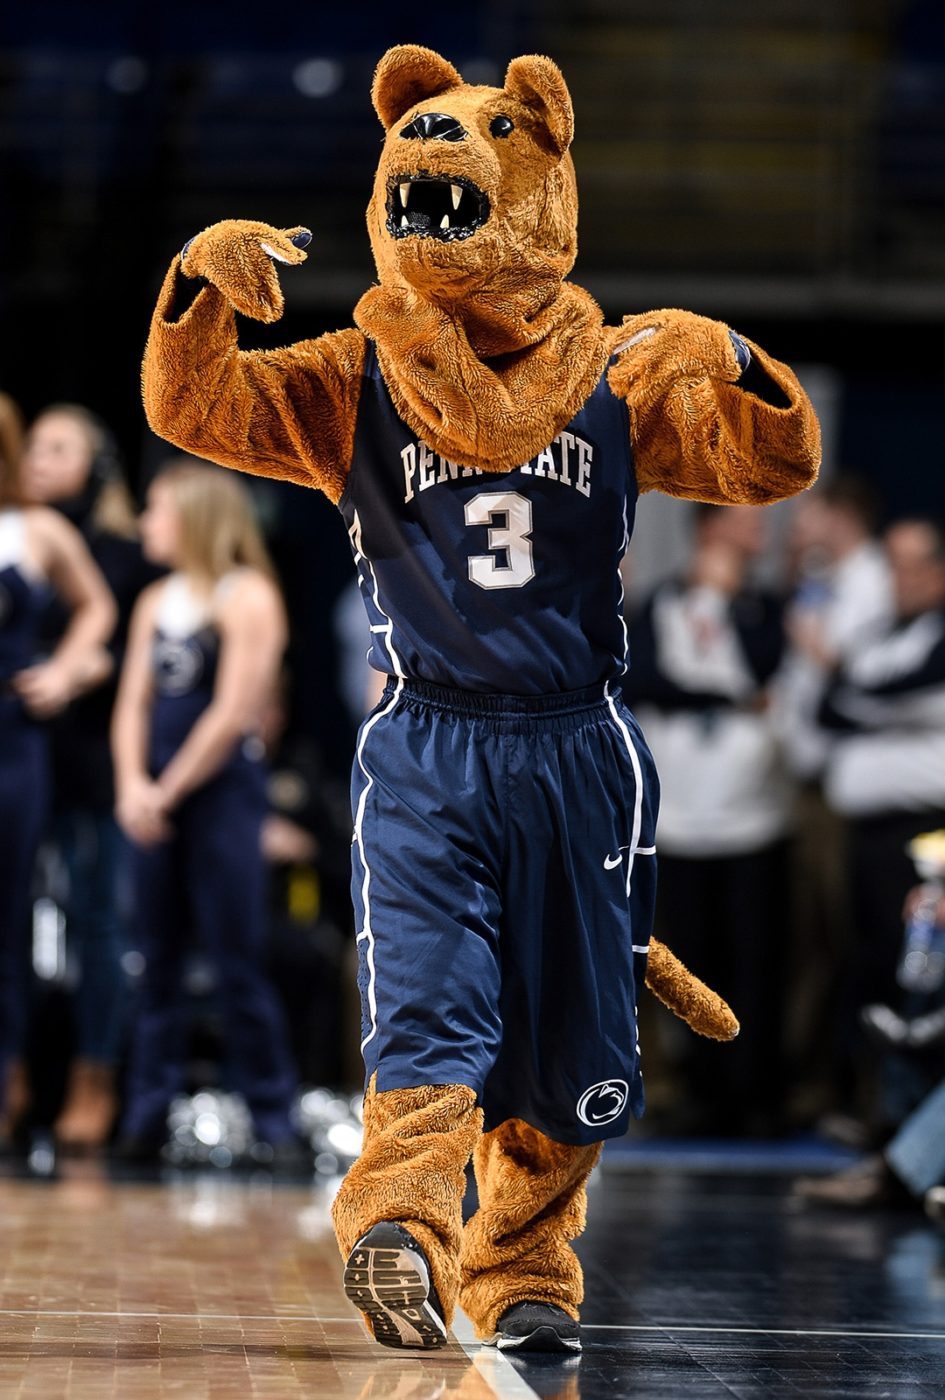 Nittany Lion Mascot Hall of Fame